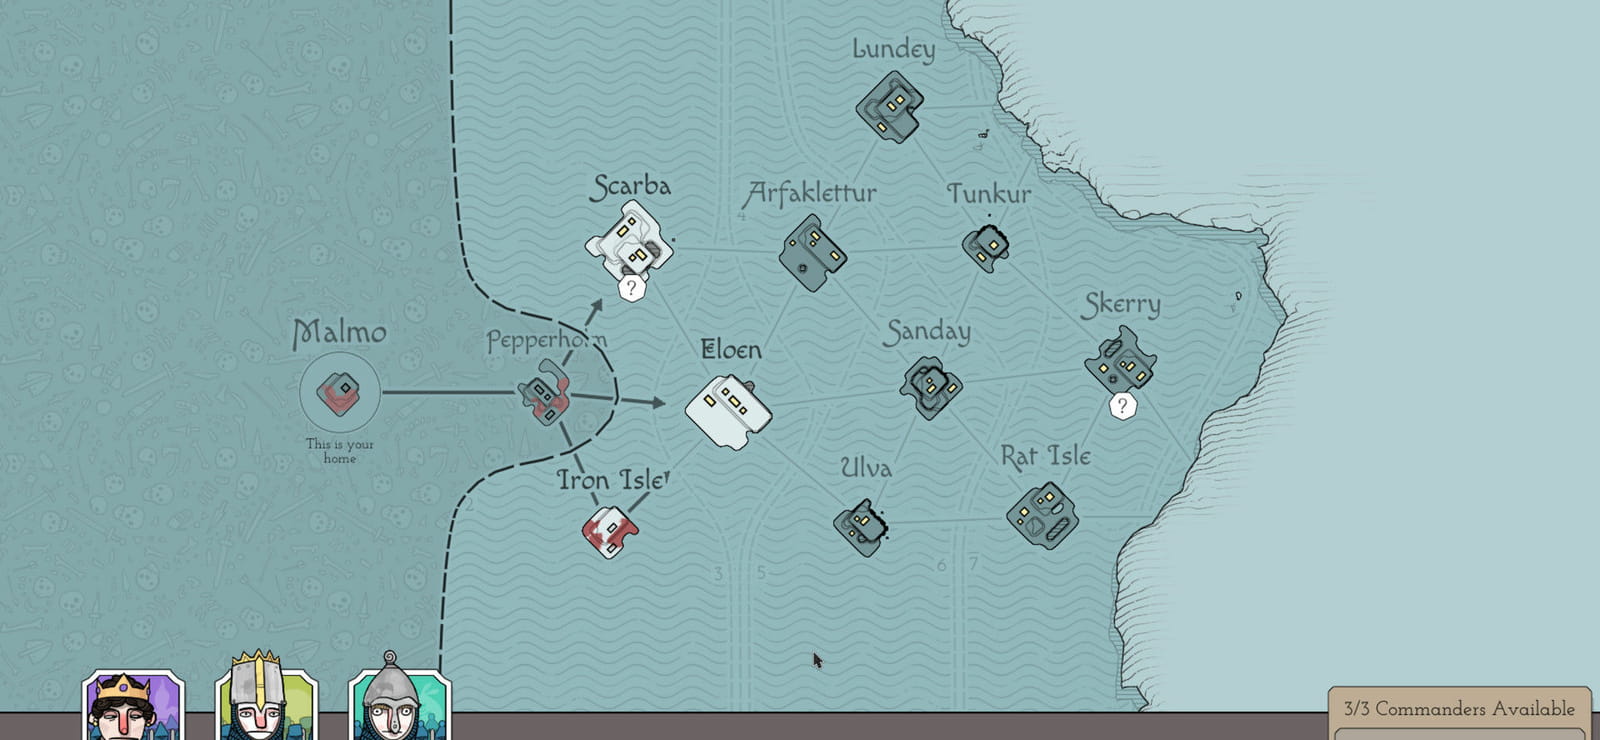 Bad North: Jotunn Edition - Deluxe Content